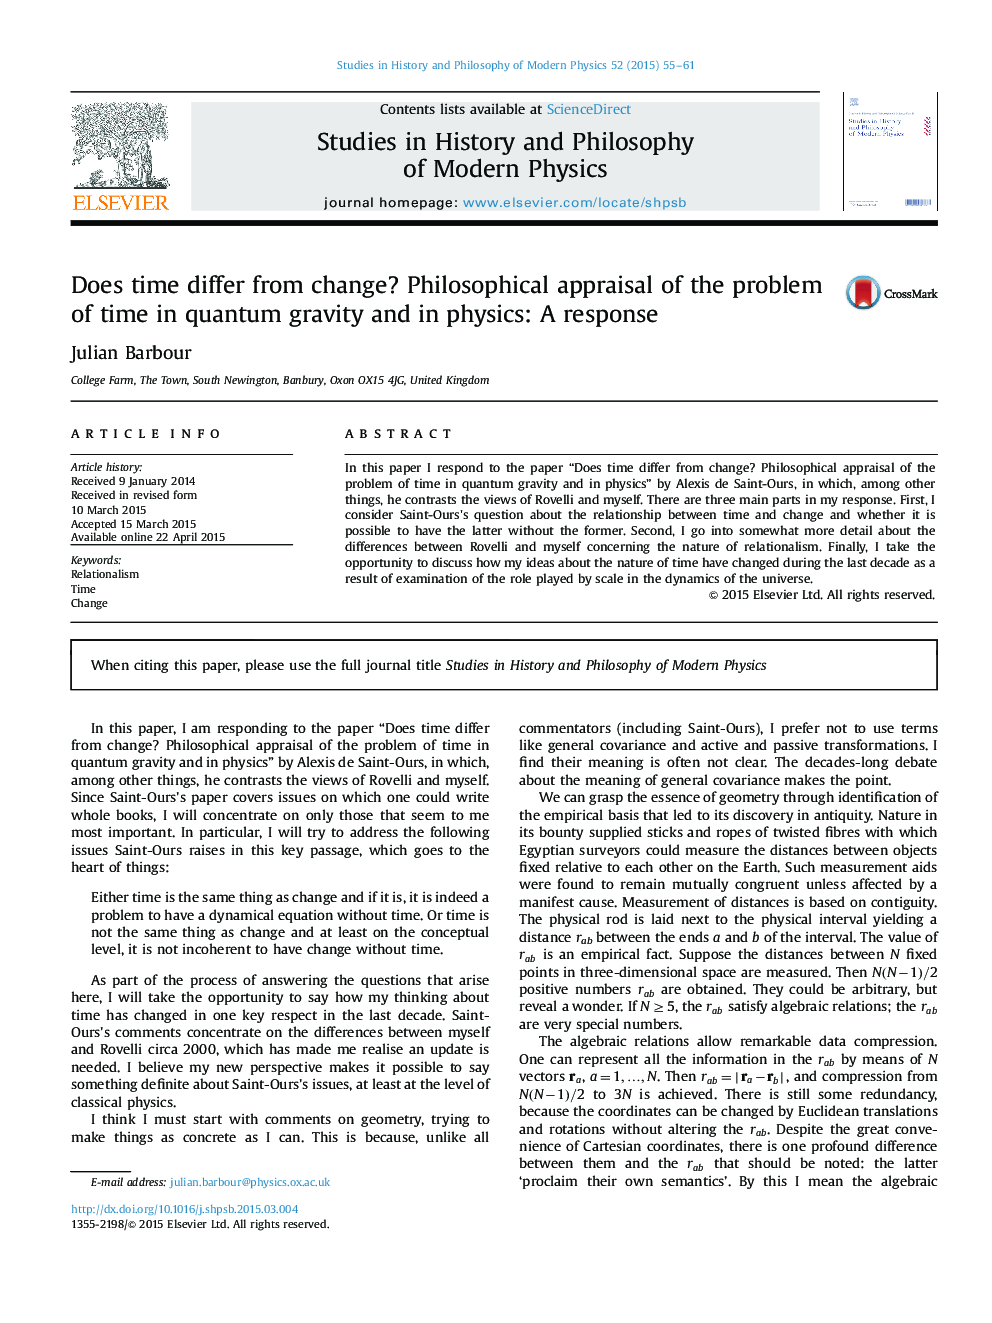 Does time differ from change? Philosophical appraisal of the problem of time in quantum gravity and in physics: A response